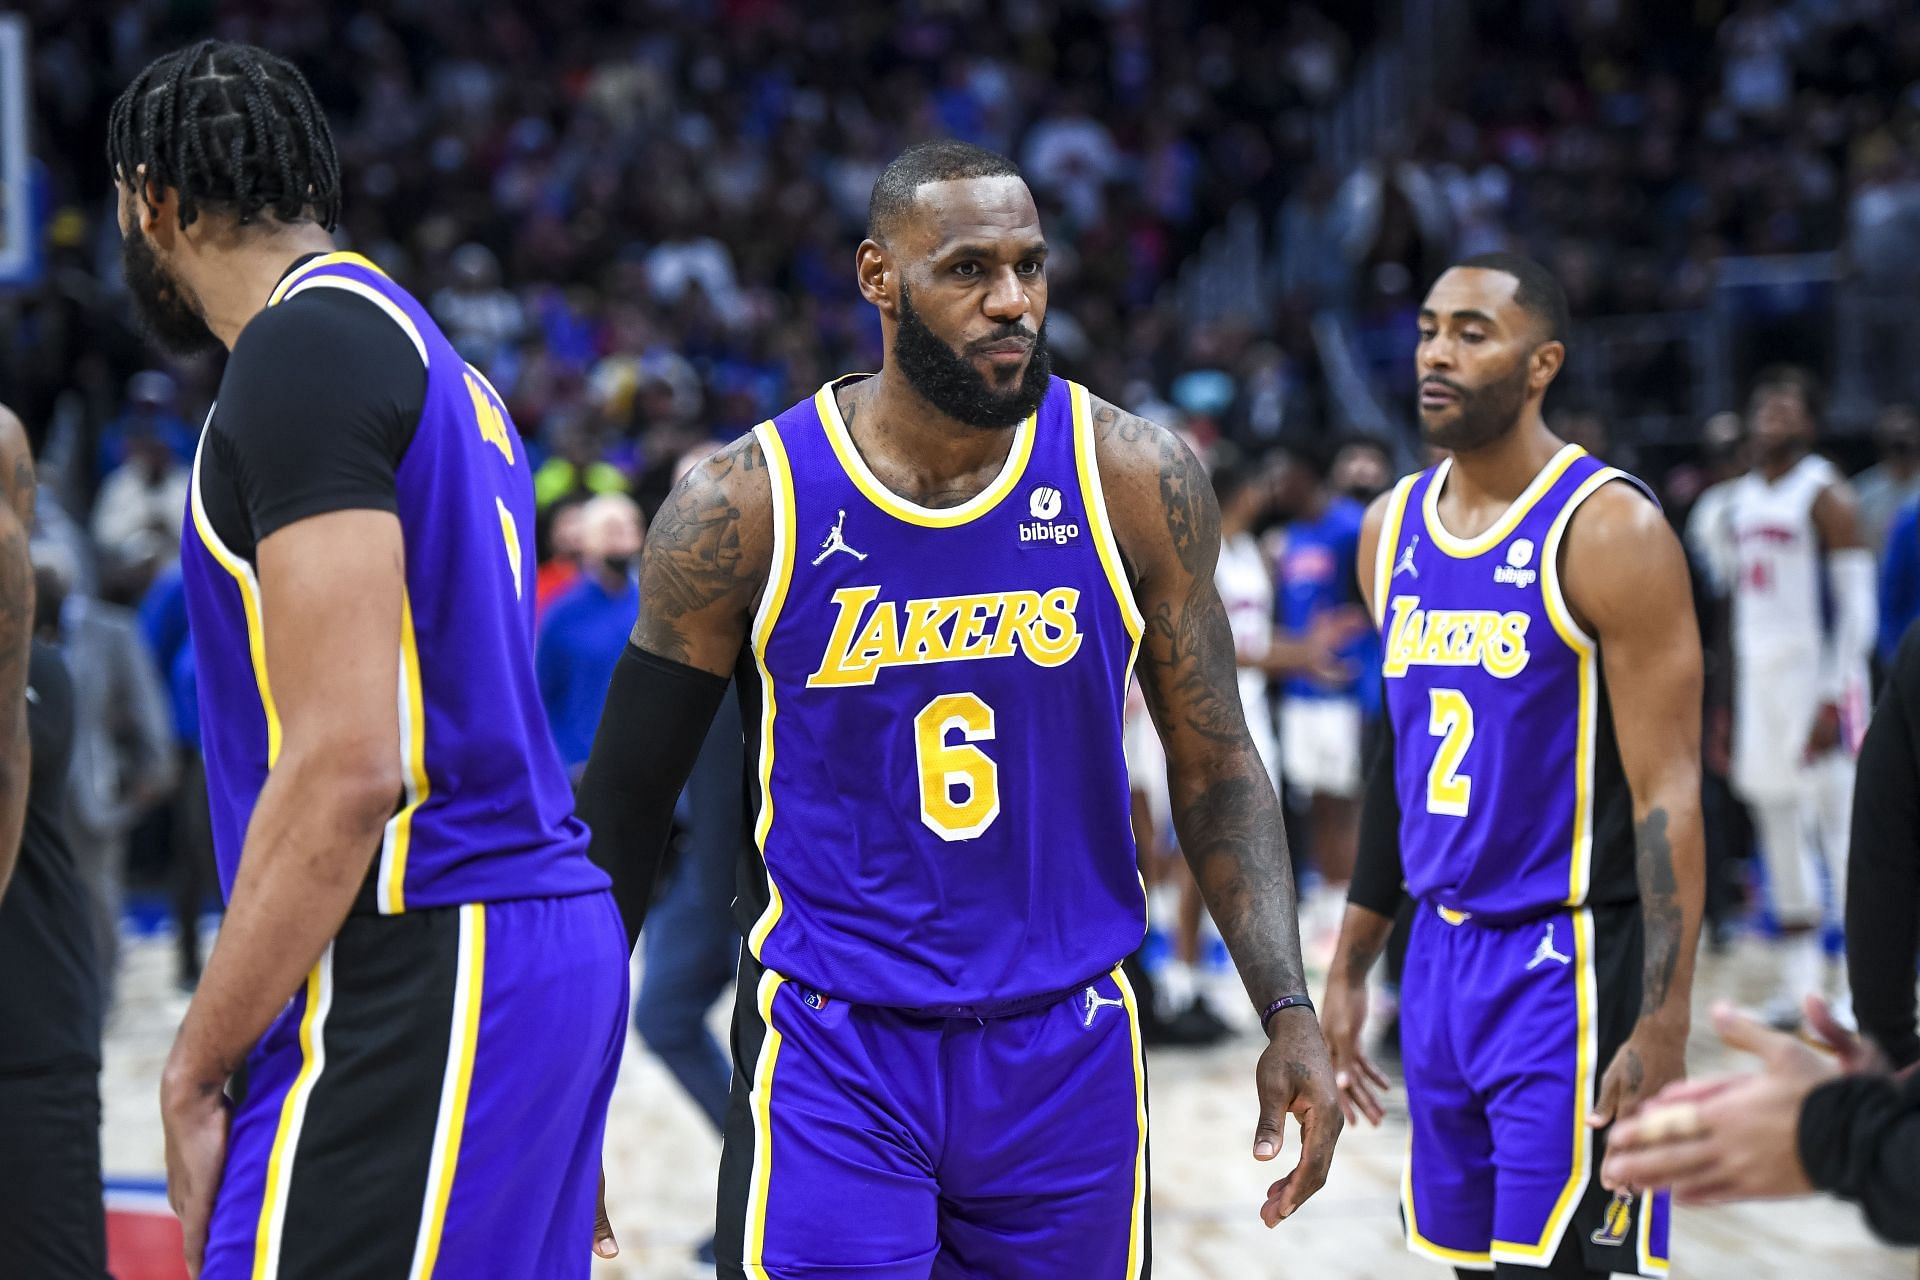 Los Angeles Lakers forward LeBron James continues to thrive on and off the court